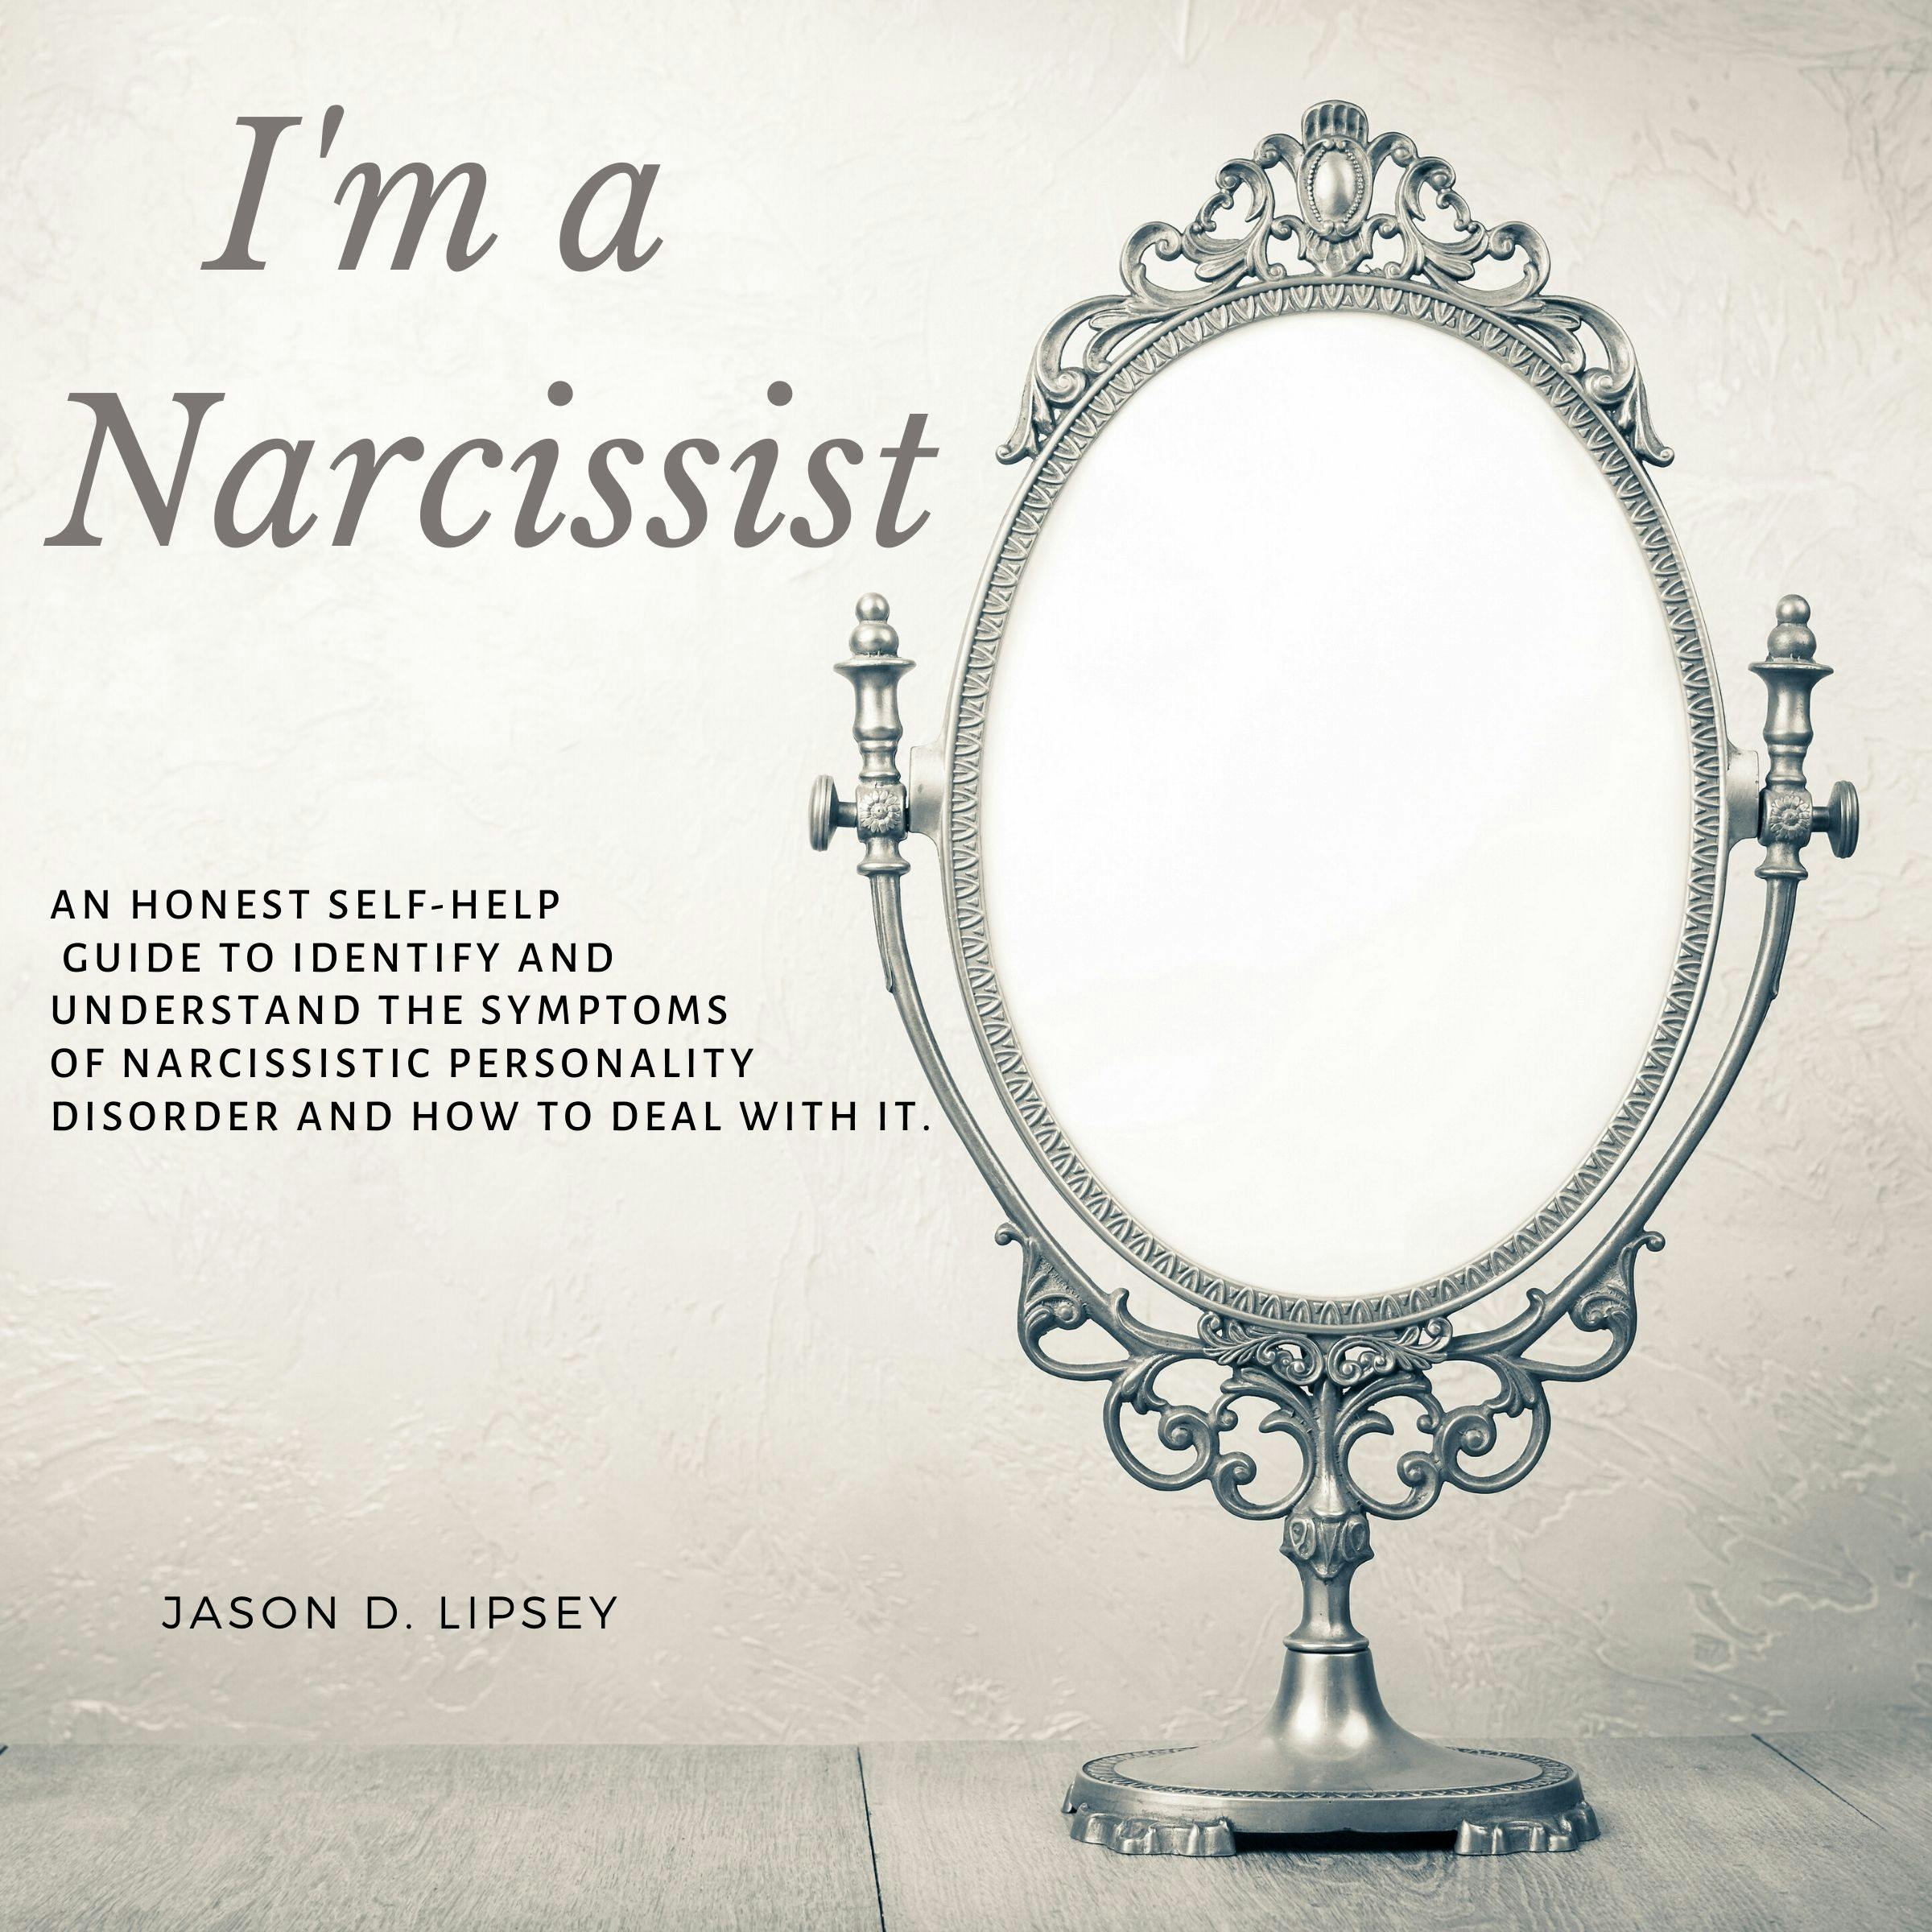 I'm a narcissist: An Honest Self-Help Guide To Identify And Understand The Symptoms Of Narcissistic Personality Disorder And How Do Deal With It - undefined